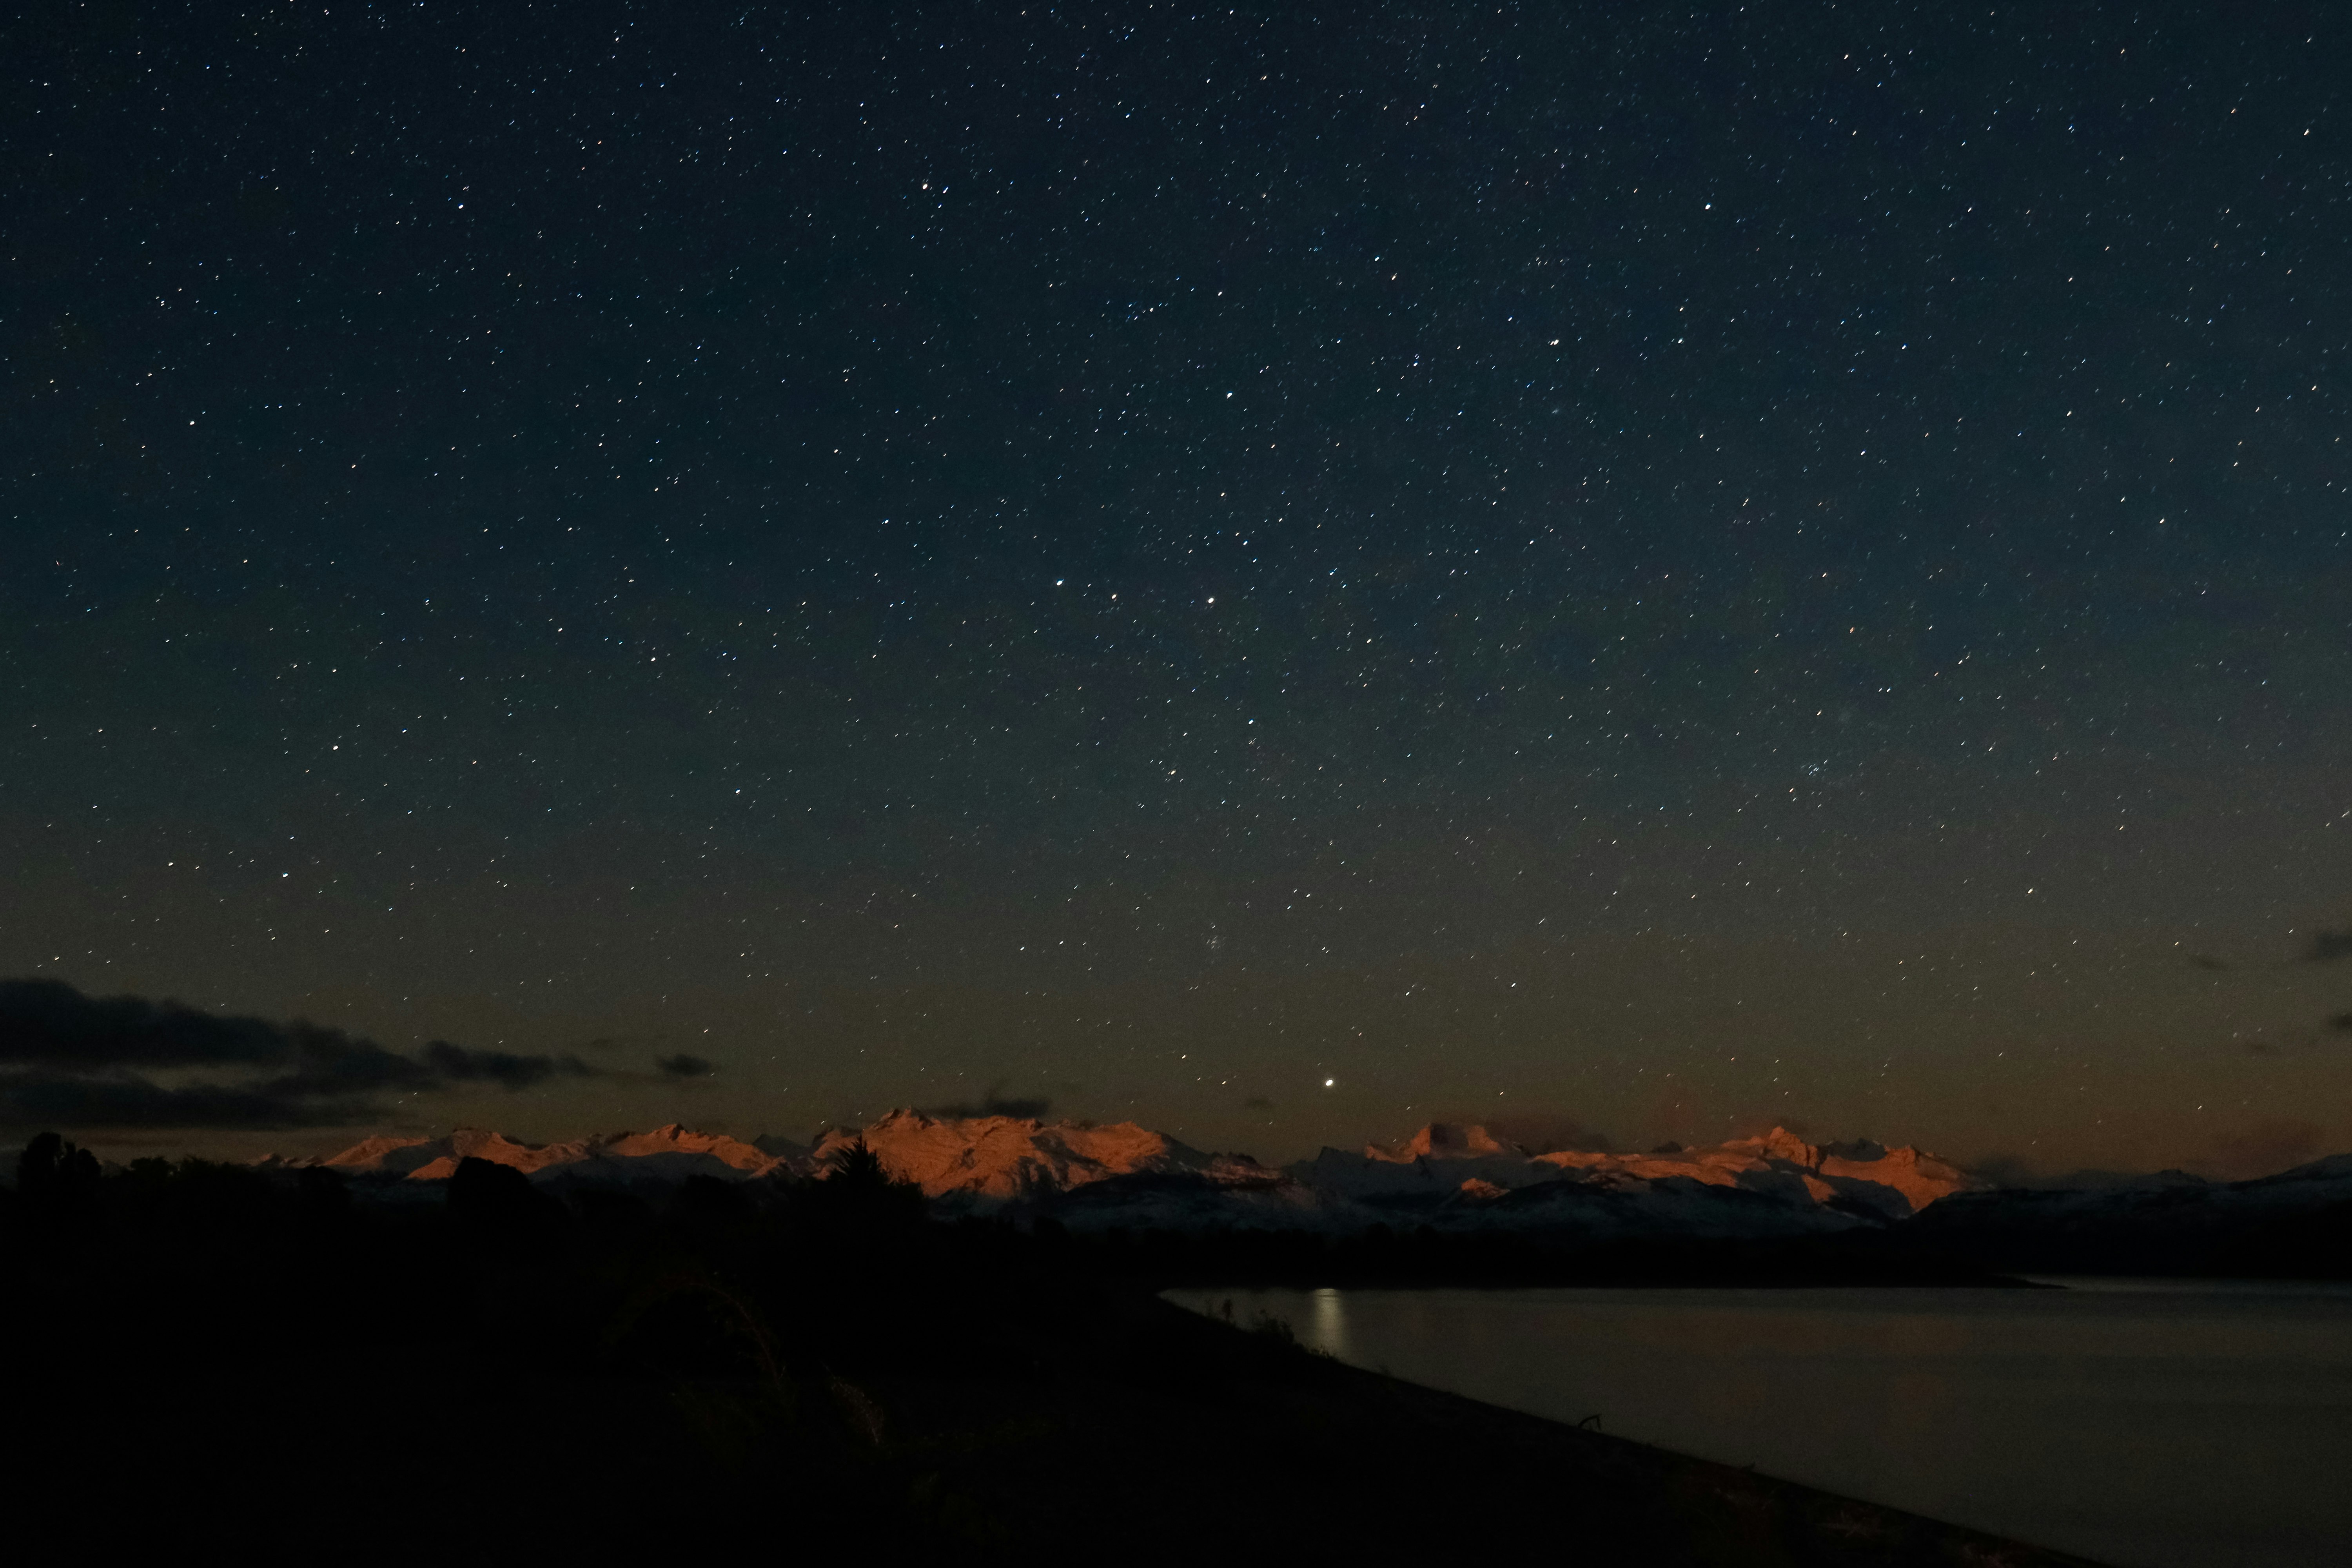 landscape photography of clear sky full of stars over mountains during night